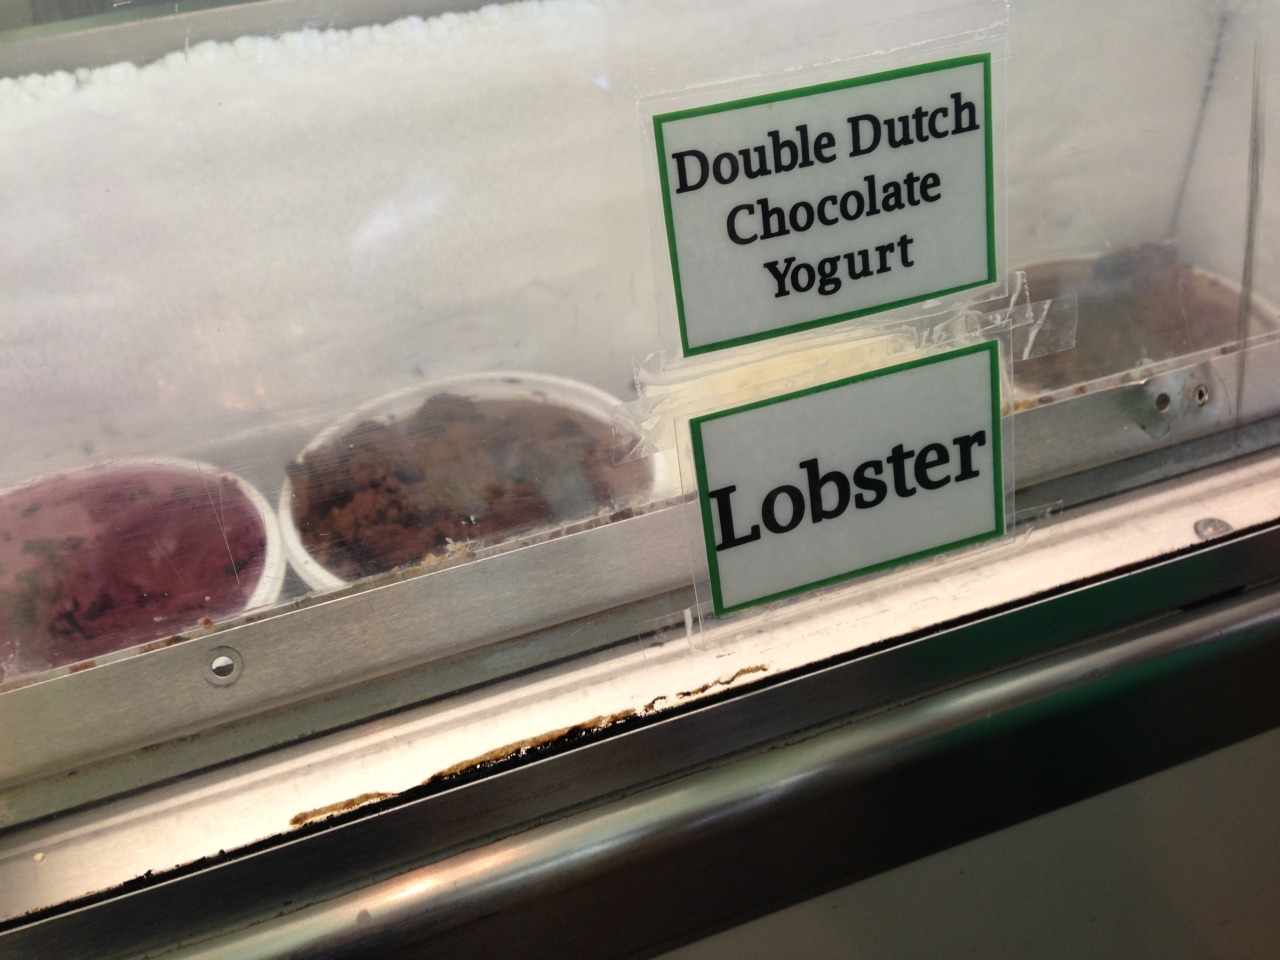 Yes, everyone, lobster ice cream EXISTS! IT EXISTS!
FYI: It tastes like chewy taffy, and I didn’t hate it.